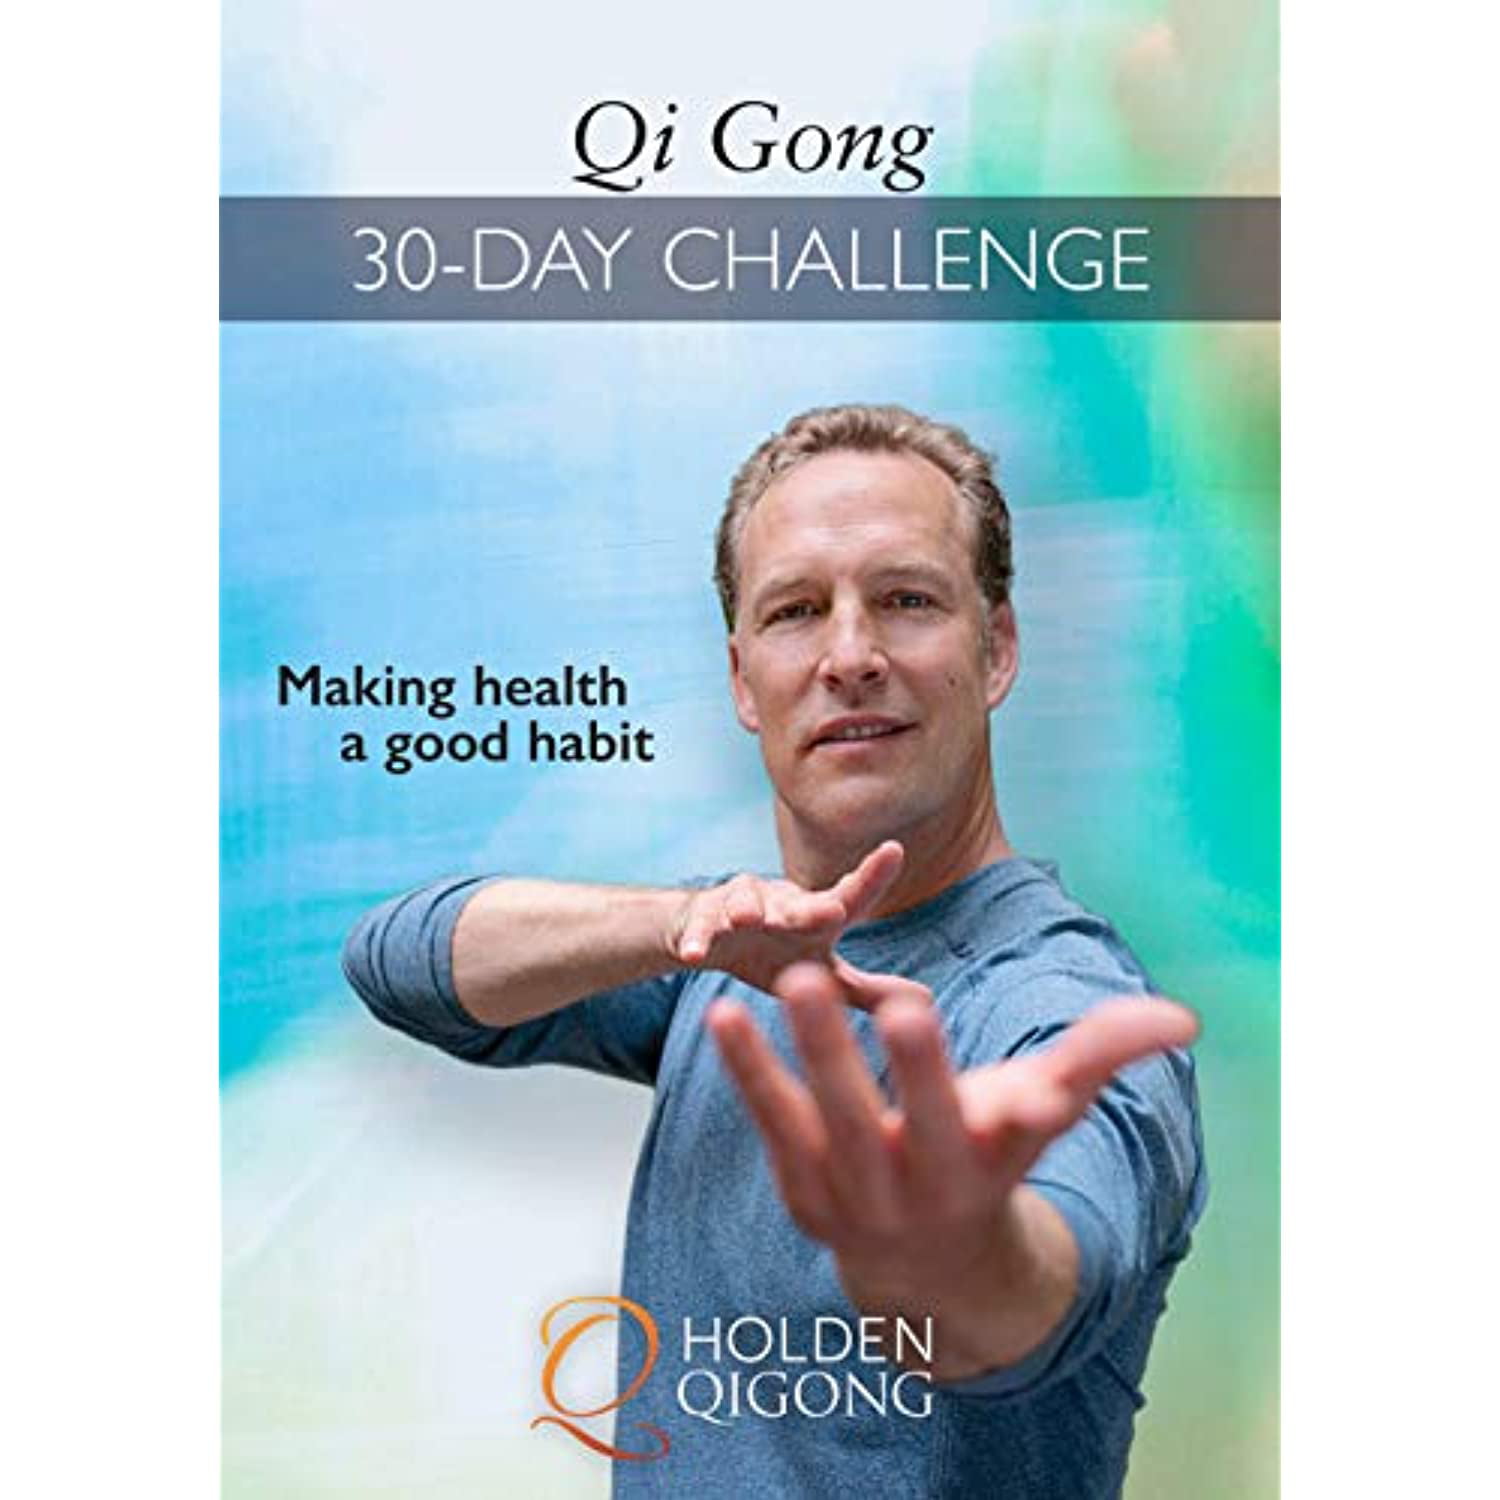 Qi Gong 30-Day Challenge With Lee Holden Dvd (Ymaa) New Qigong Dvd  Bestseller Perfect For Qigong Beginners 